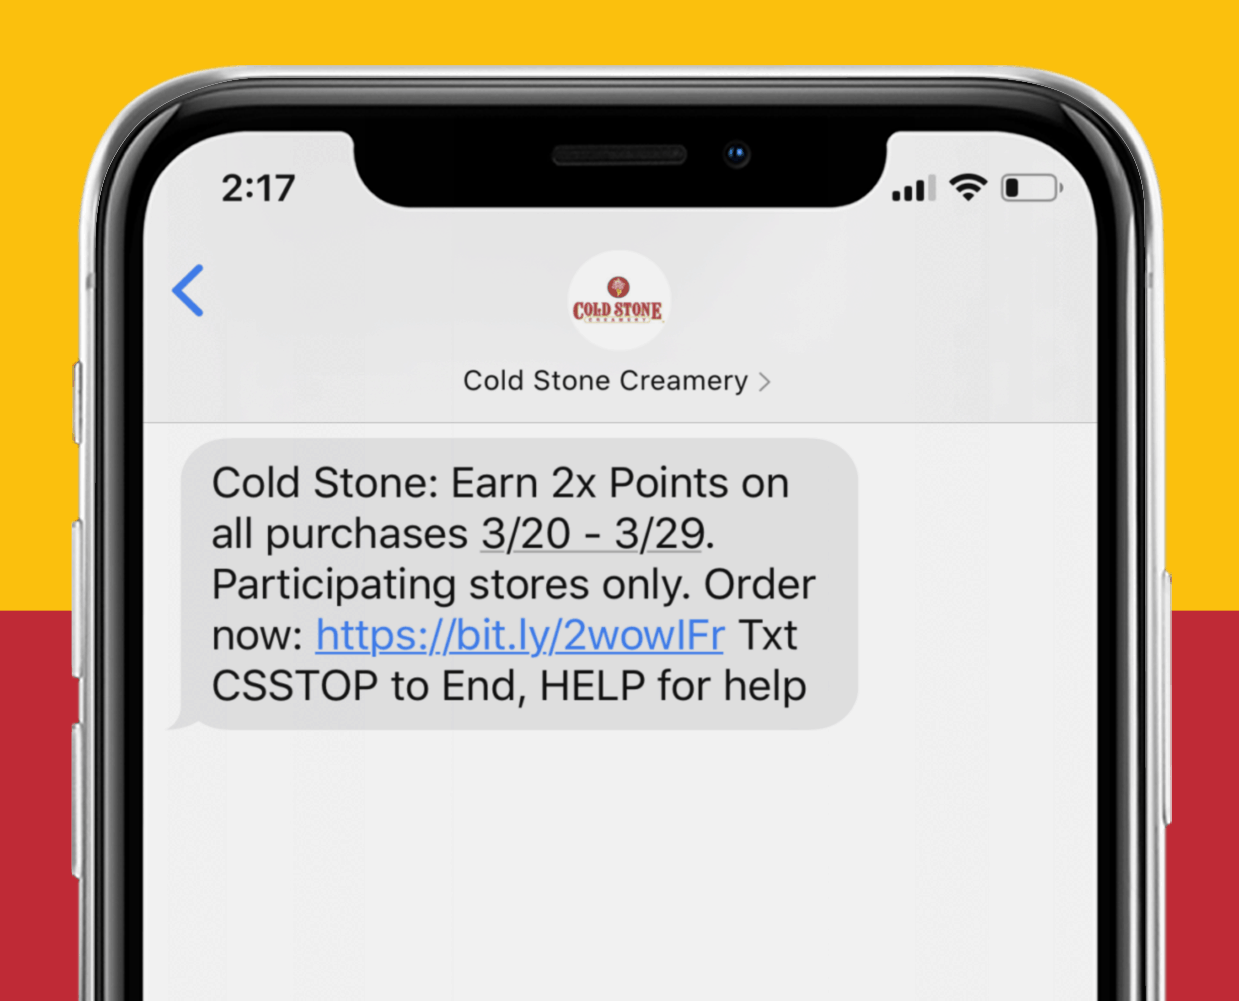 Cold Stone Creamery SMS Marketing Example for Restaurants